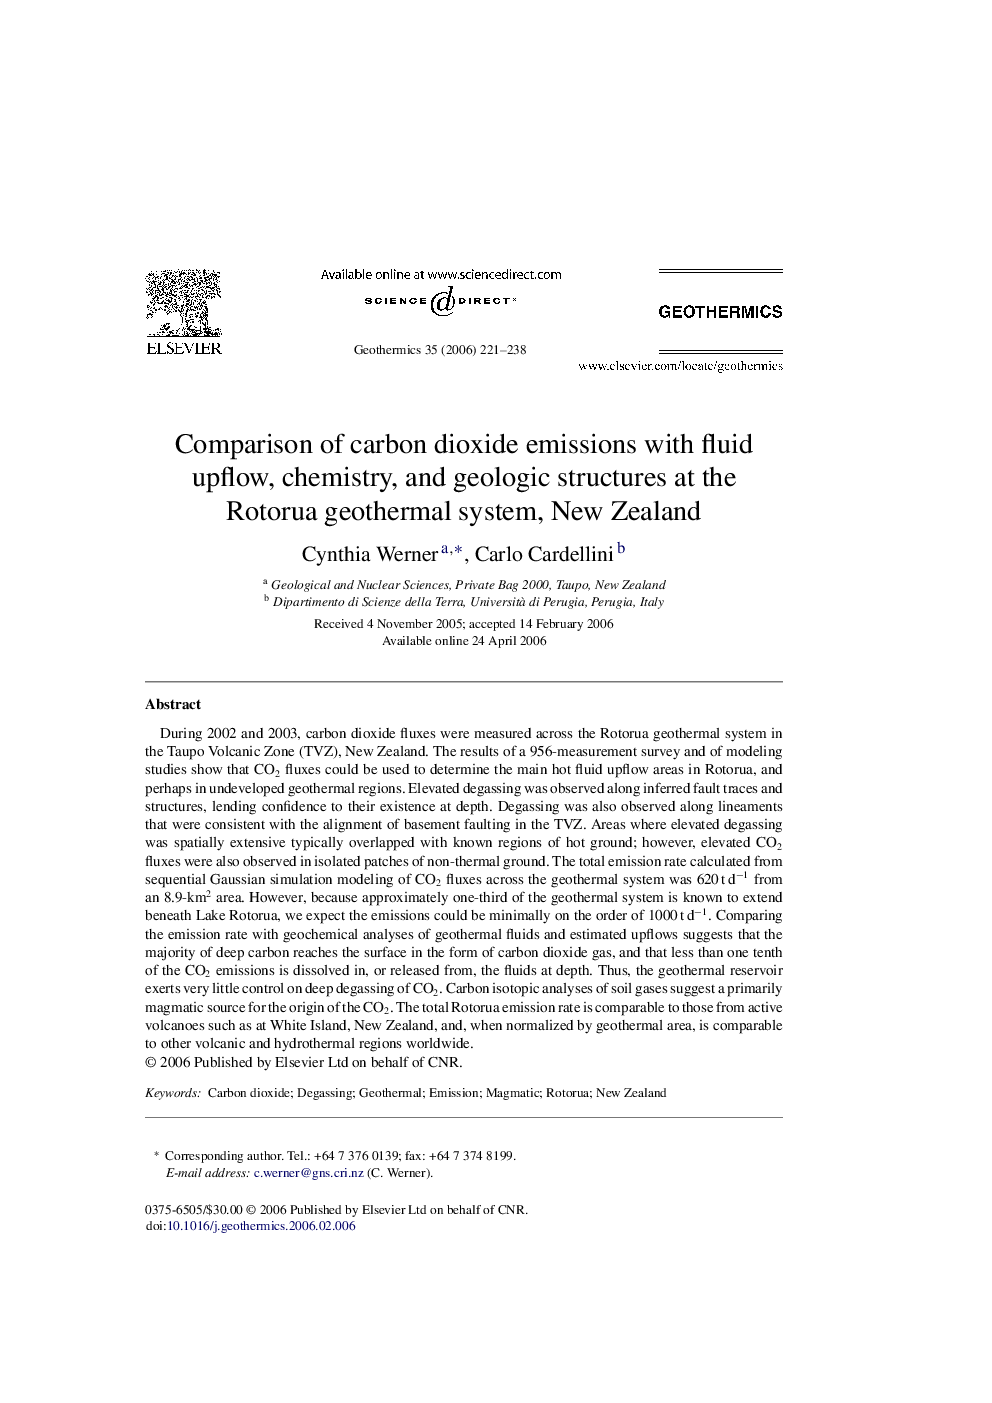 Comparison of carbon dioxide emissions with fluid upflow, chemistry, and geologic structures at the Rotorua geothermal system, New Zealand